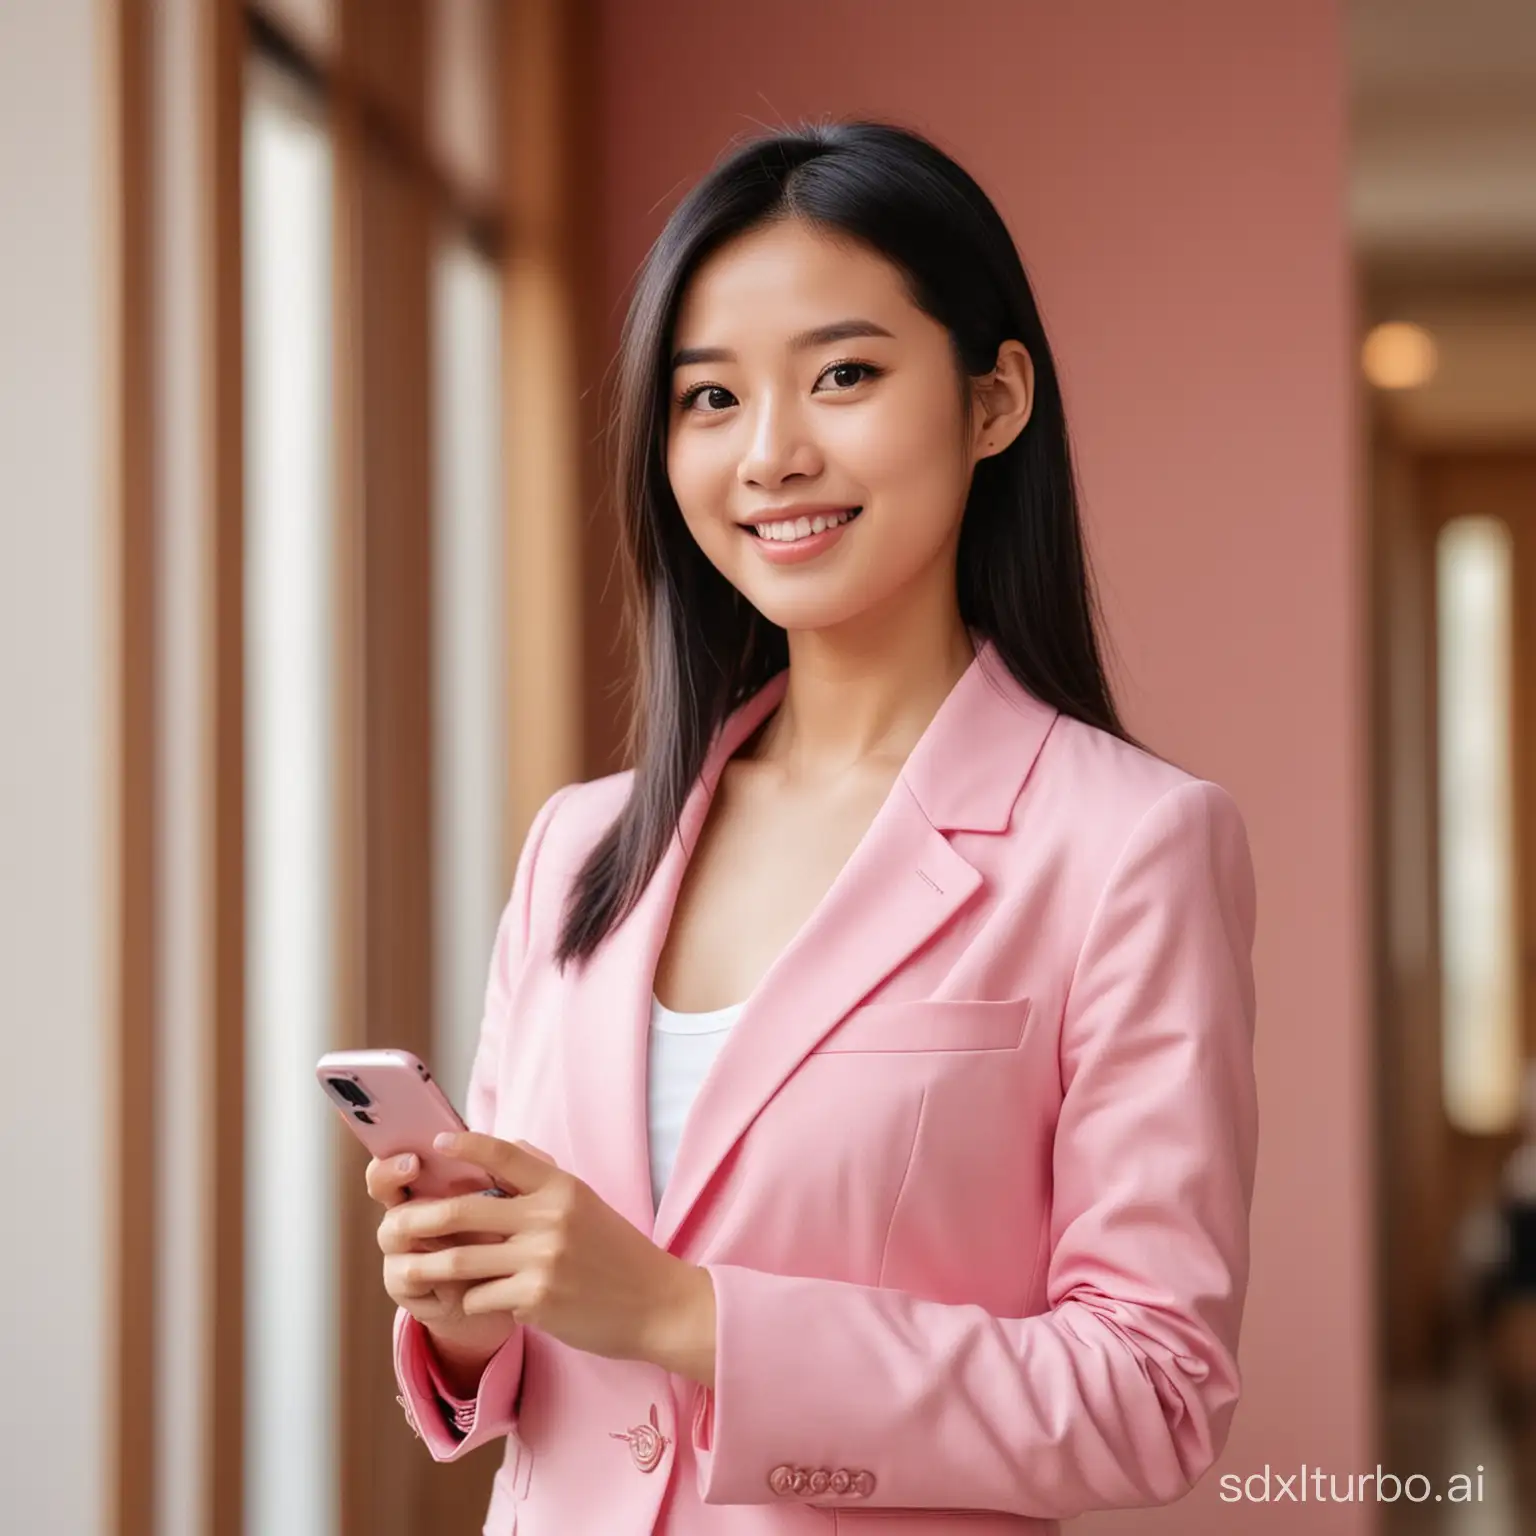 Smiling-Chinese-Woman-in-Pink-Blazer-Holding-Cellphone